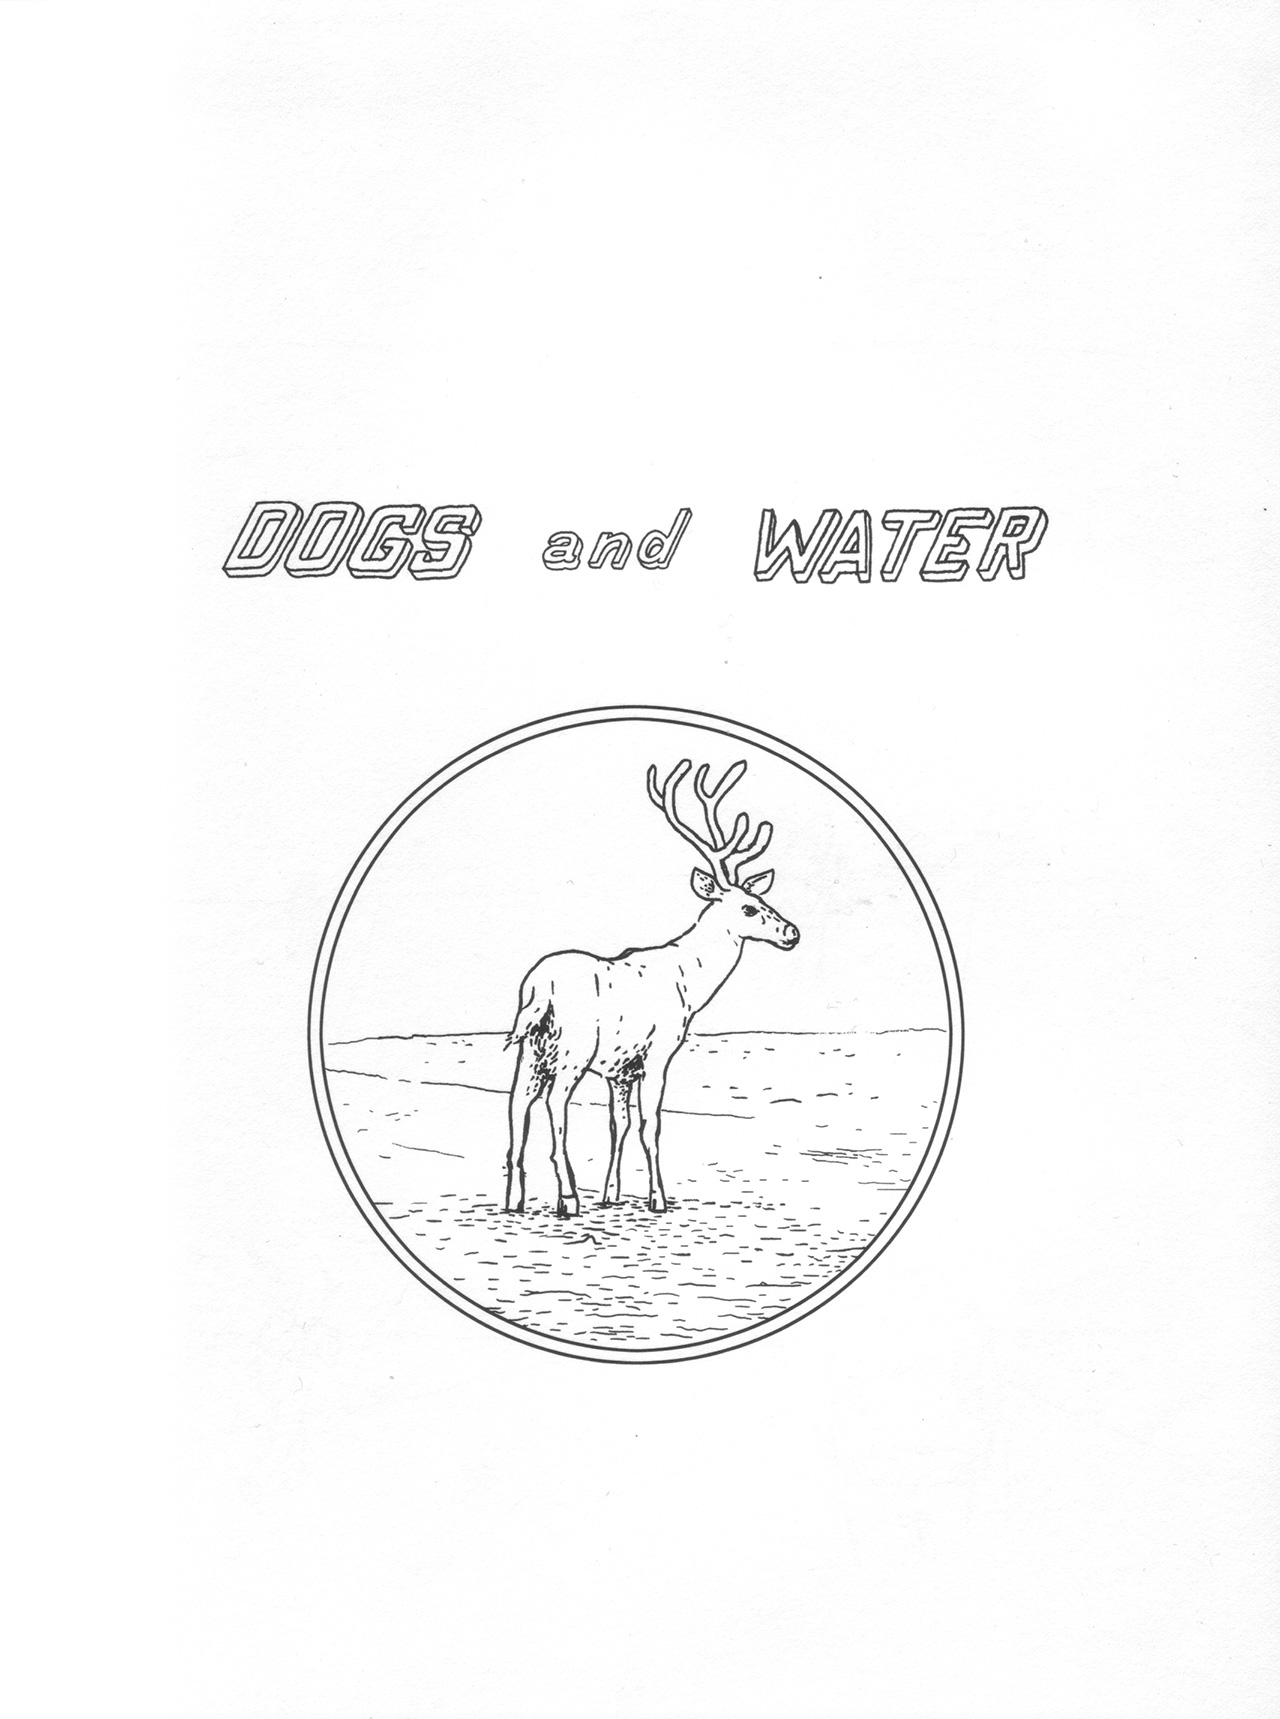 Read online Dogs and Water comic -  Issue # TPB - 6